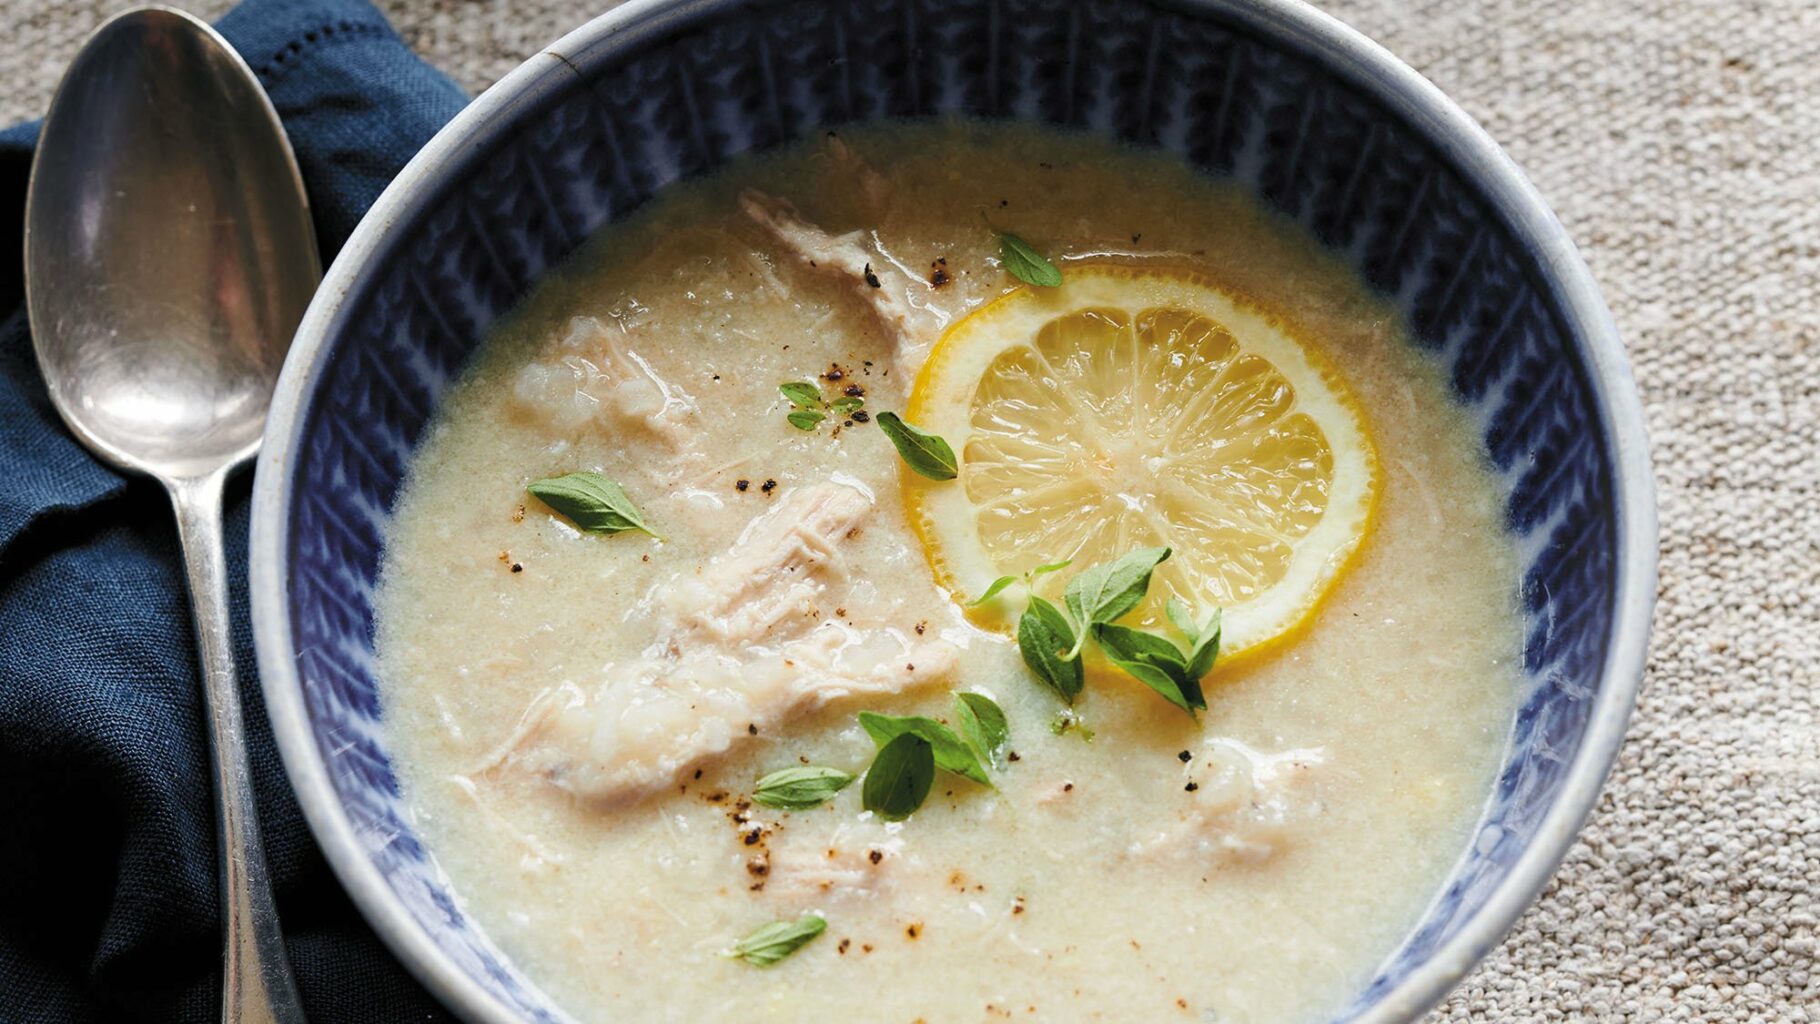 Avgolemono Greek Chicken Soup recipe. Excerpted from Preppy Kitchen. Copyright © 2022, John Kanell. Photography Copyright © 2022 By David Malosh. Reproduced by permission of Simon Element, an imprint of Simon & Schuster. All rights reserved.